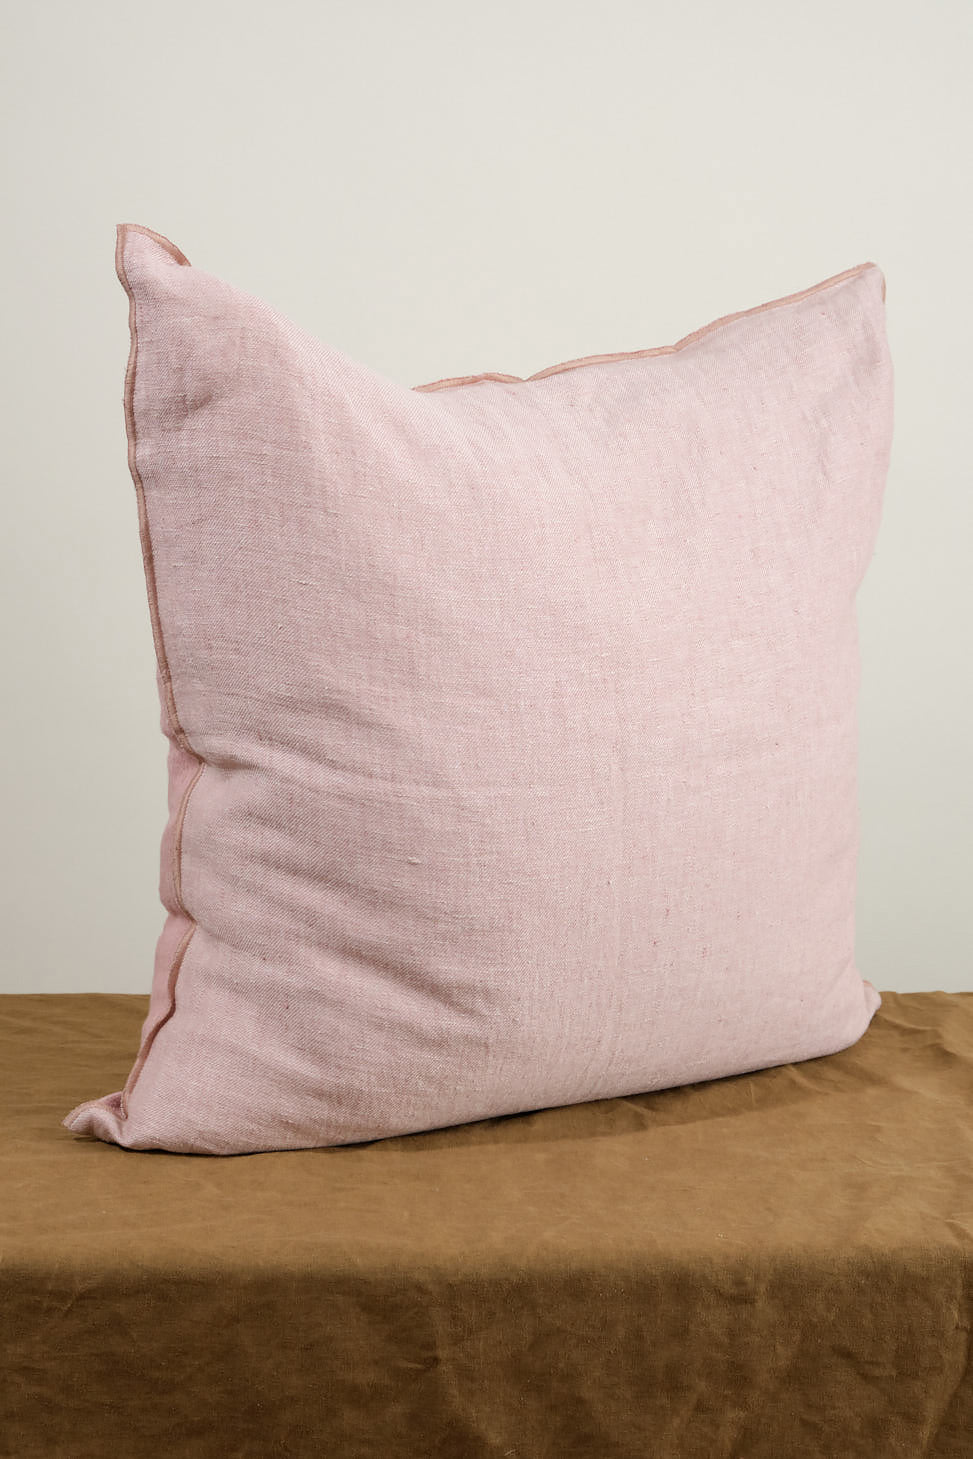 Angled view of Vice Versa Cushion in Bois de Rose